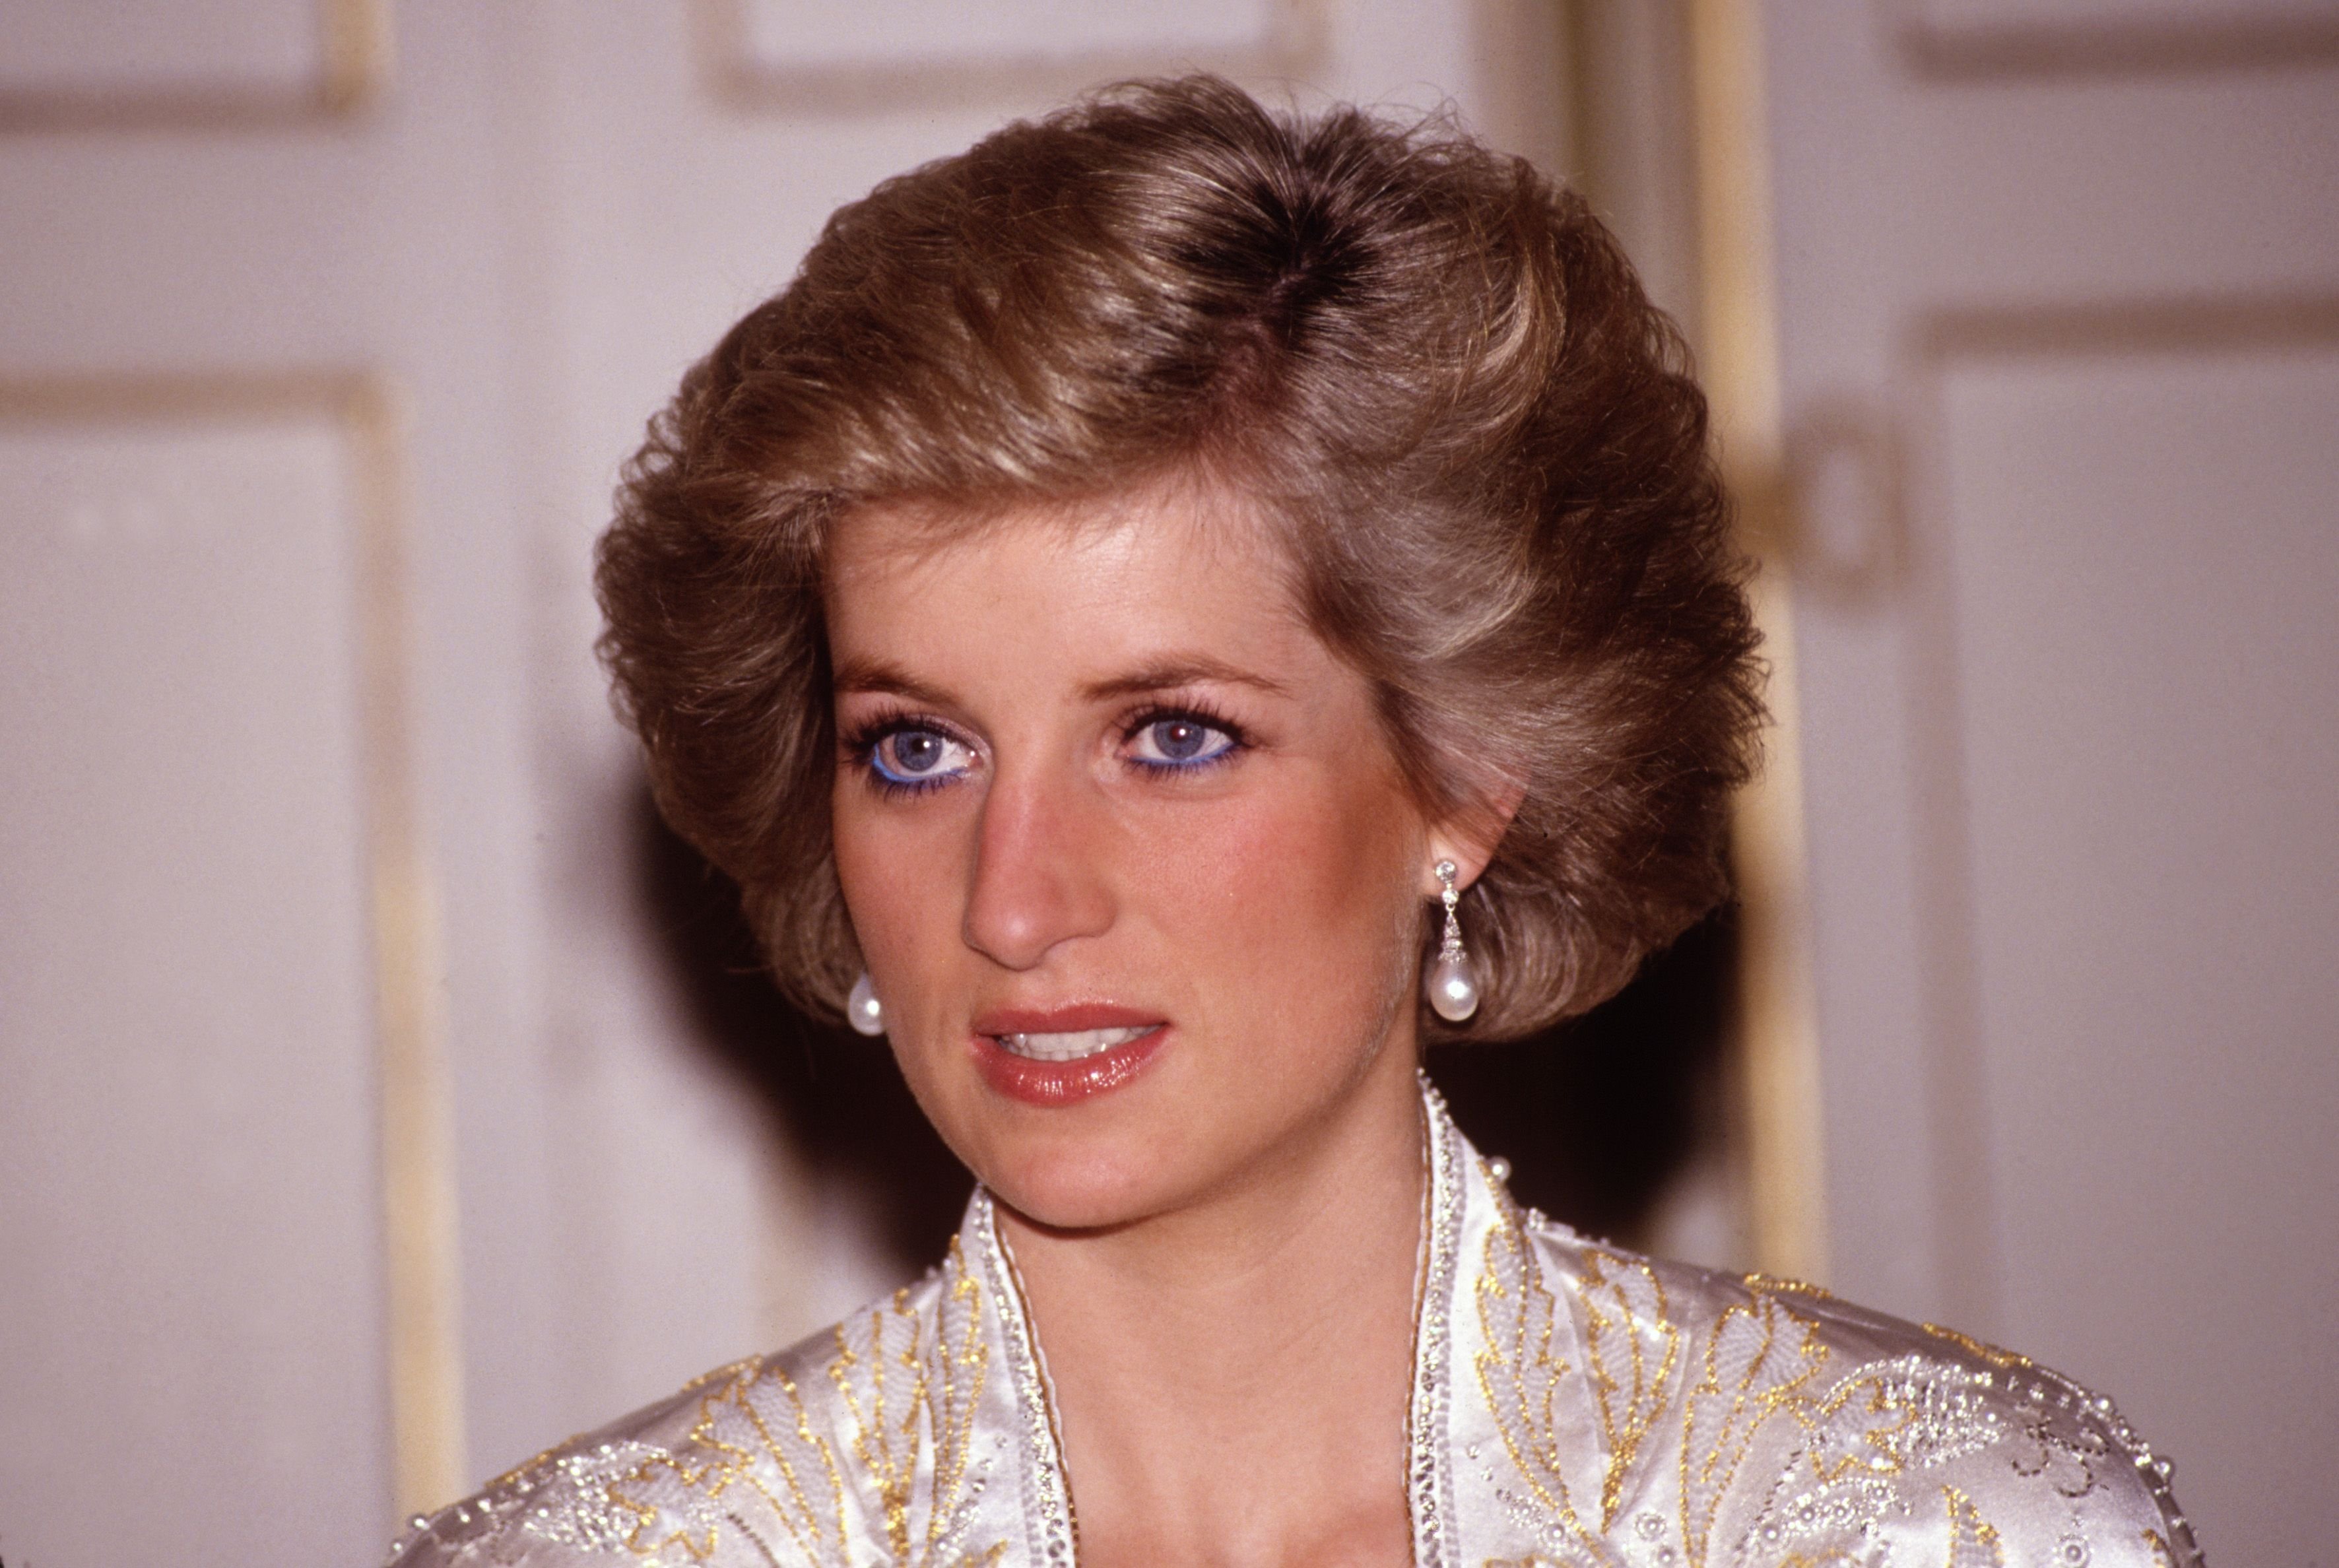 Princess Diana at a dinner given by President Mitterand in 1988, at the Elysee Palace in Paris, France | Source: Getty Images